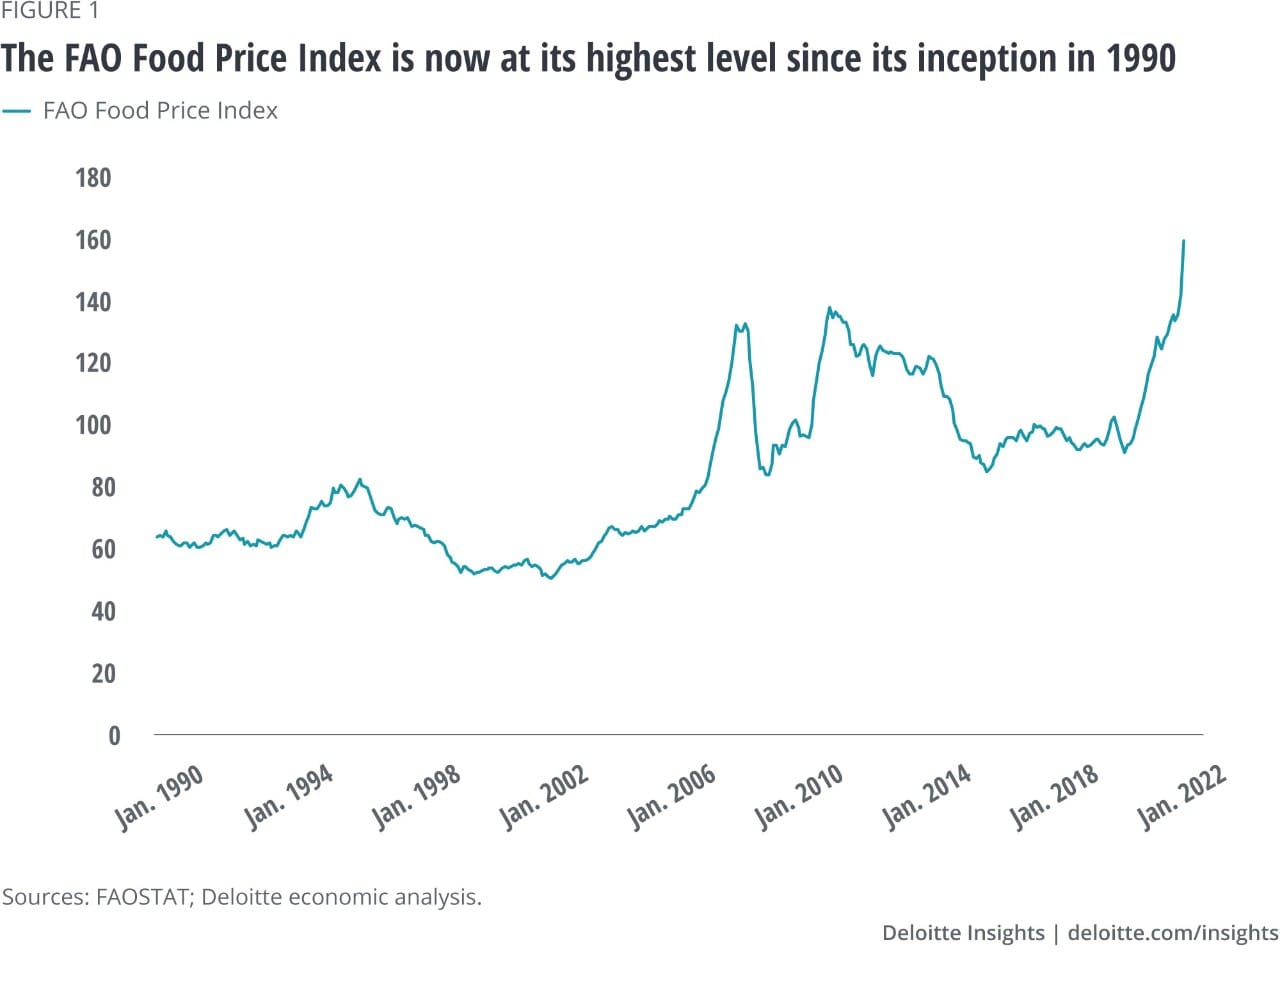 Figure 1. The FAO Food Price Index is now at its highest level since its inception in 1990